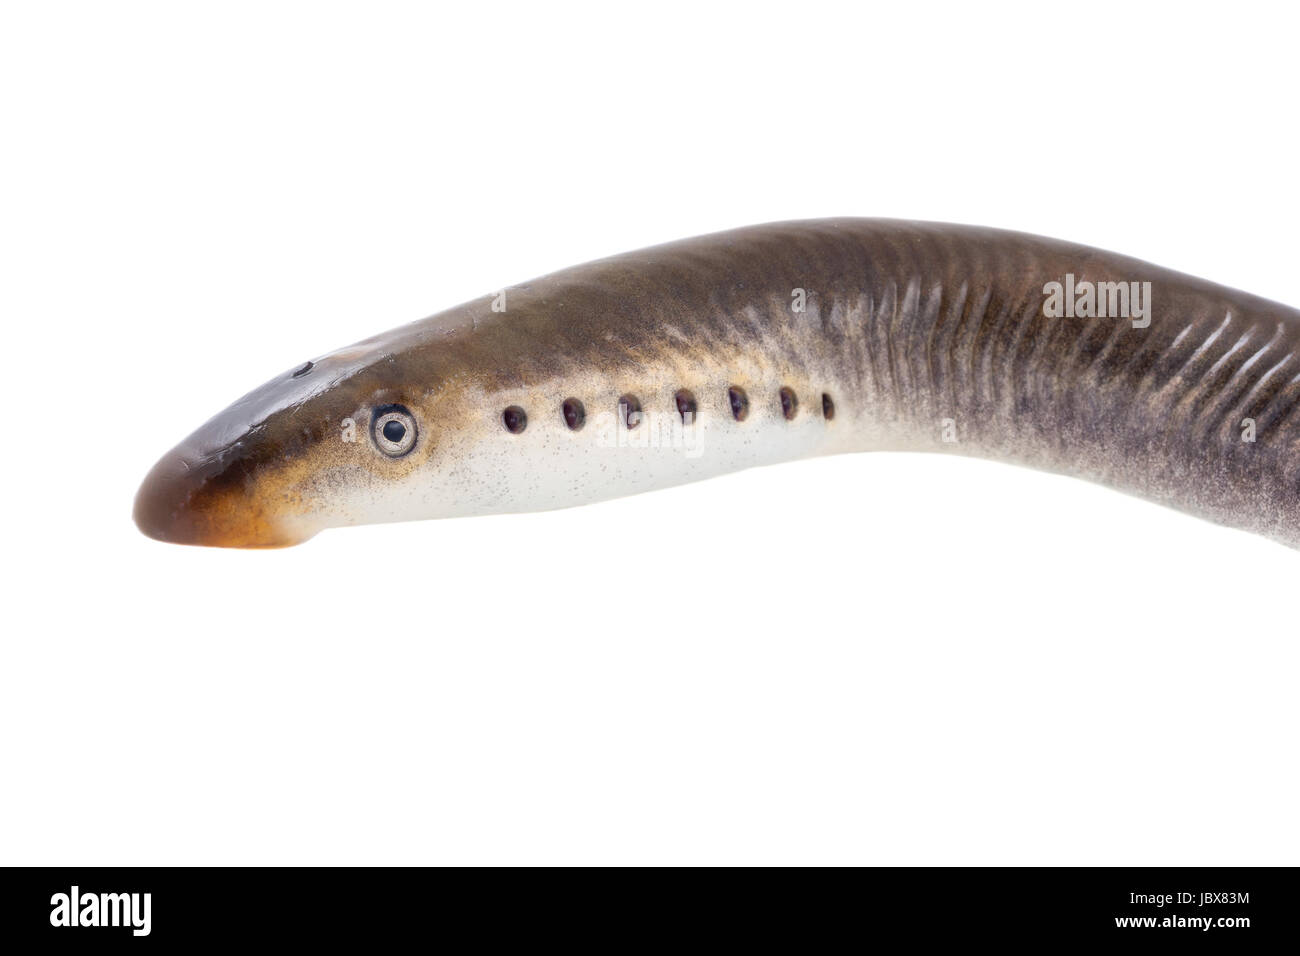 River lamprey - isolated on a white background Stock Photo